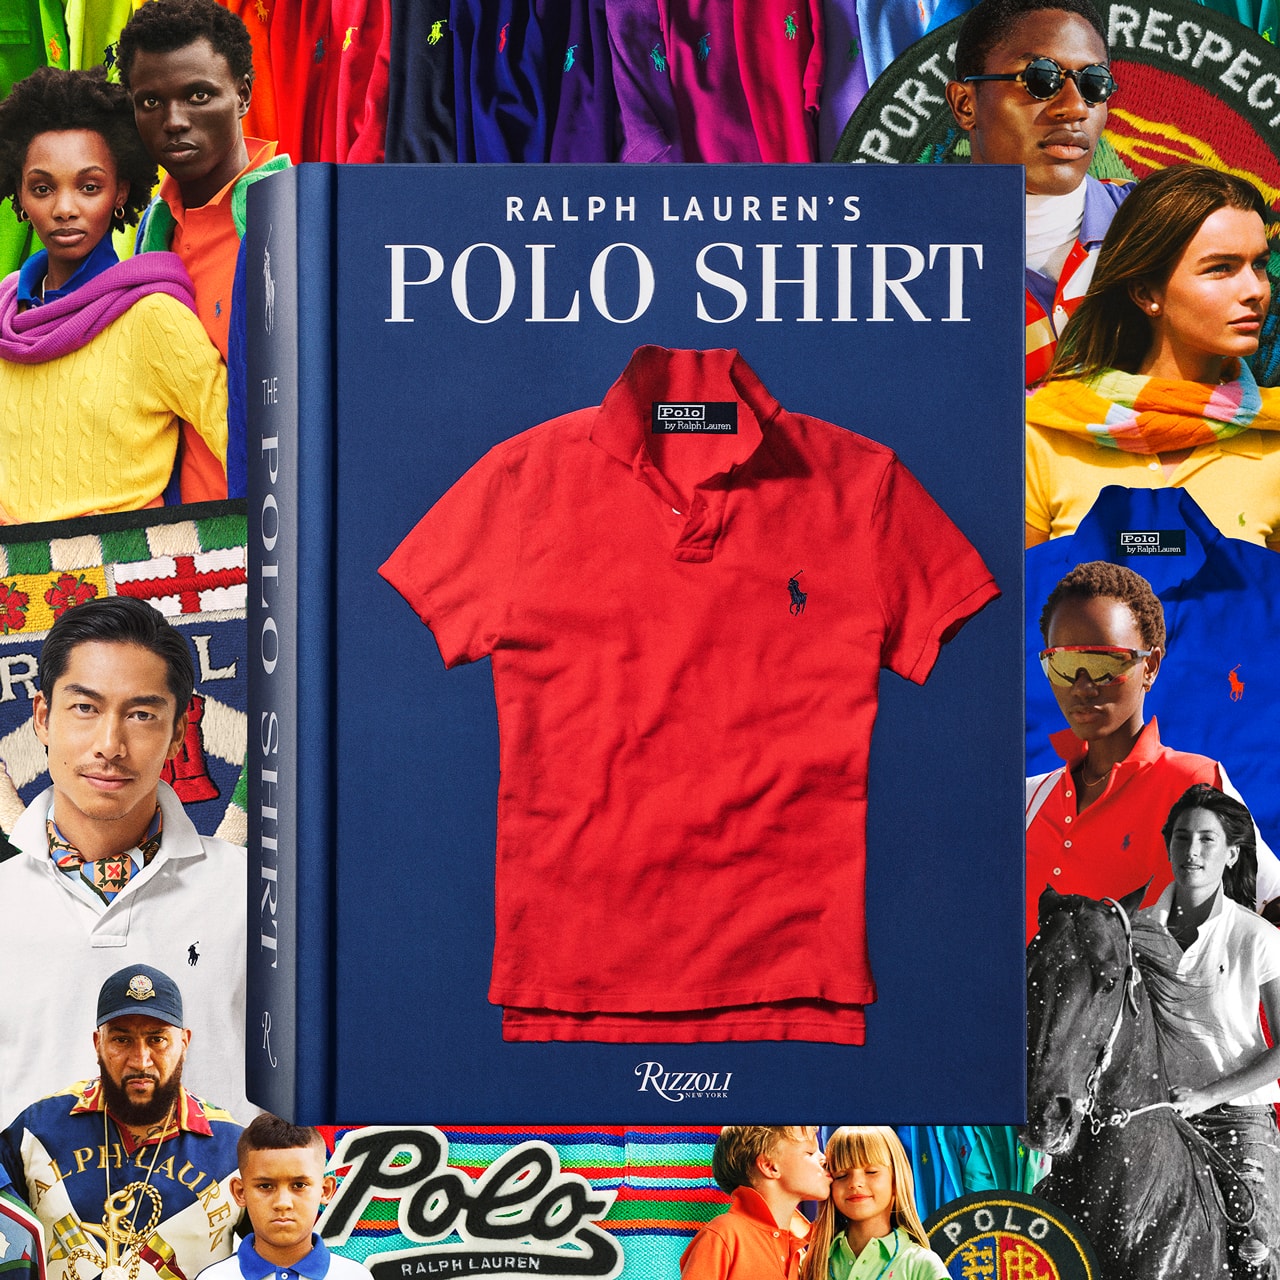 Ralph Lauren's Polo Shirt Book celebrates 50 years of the iconic